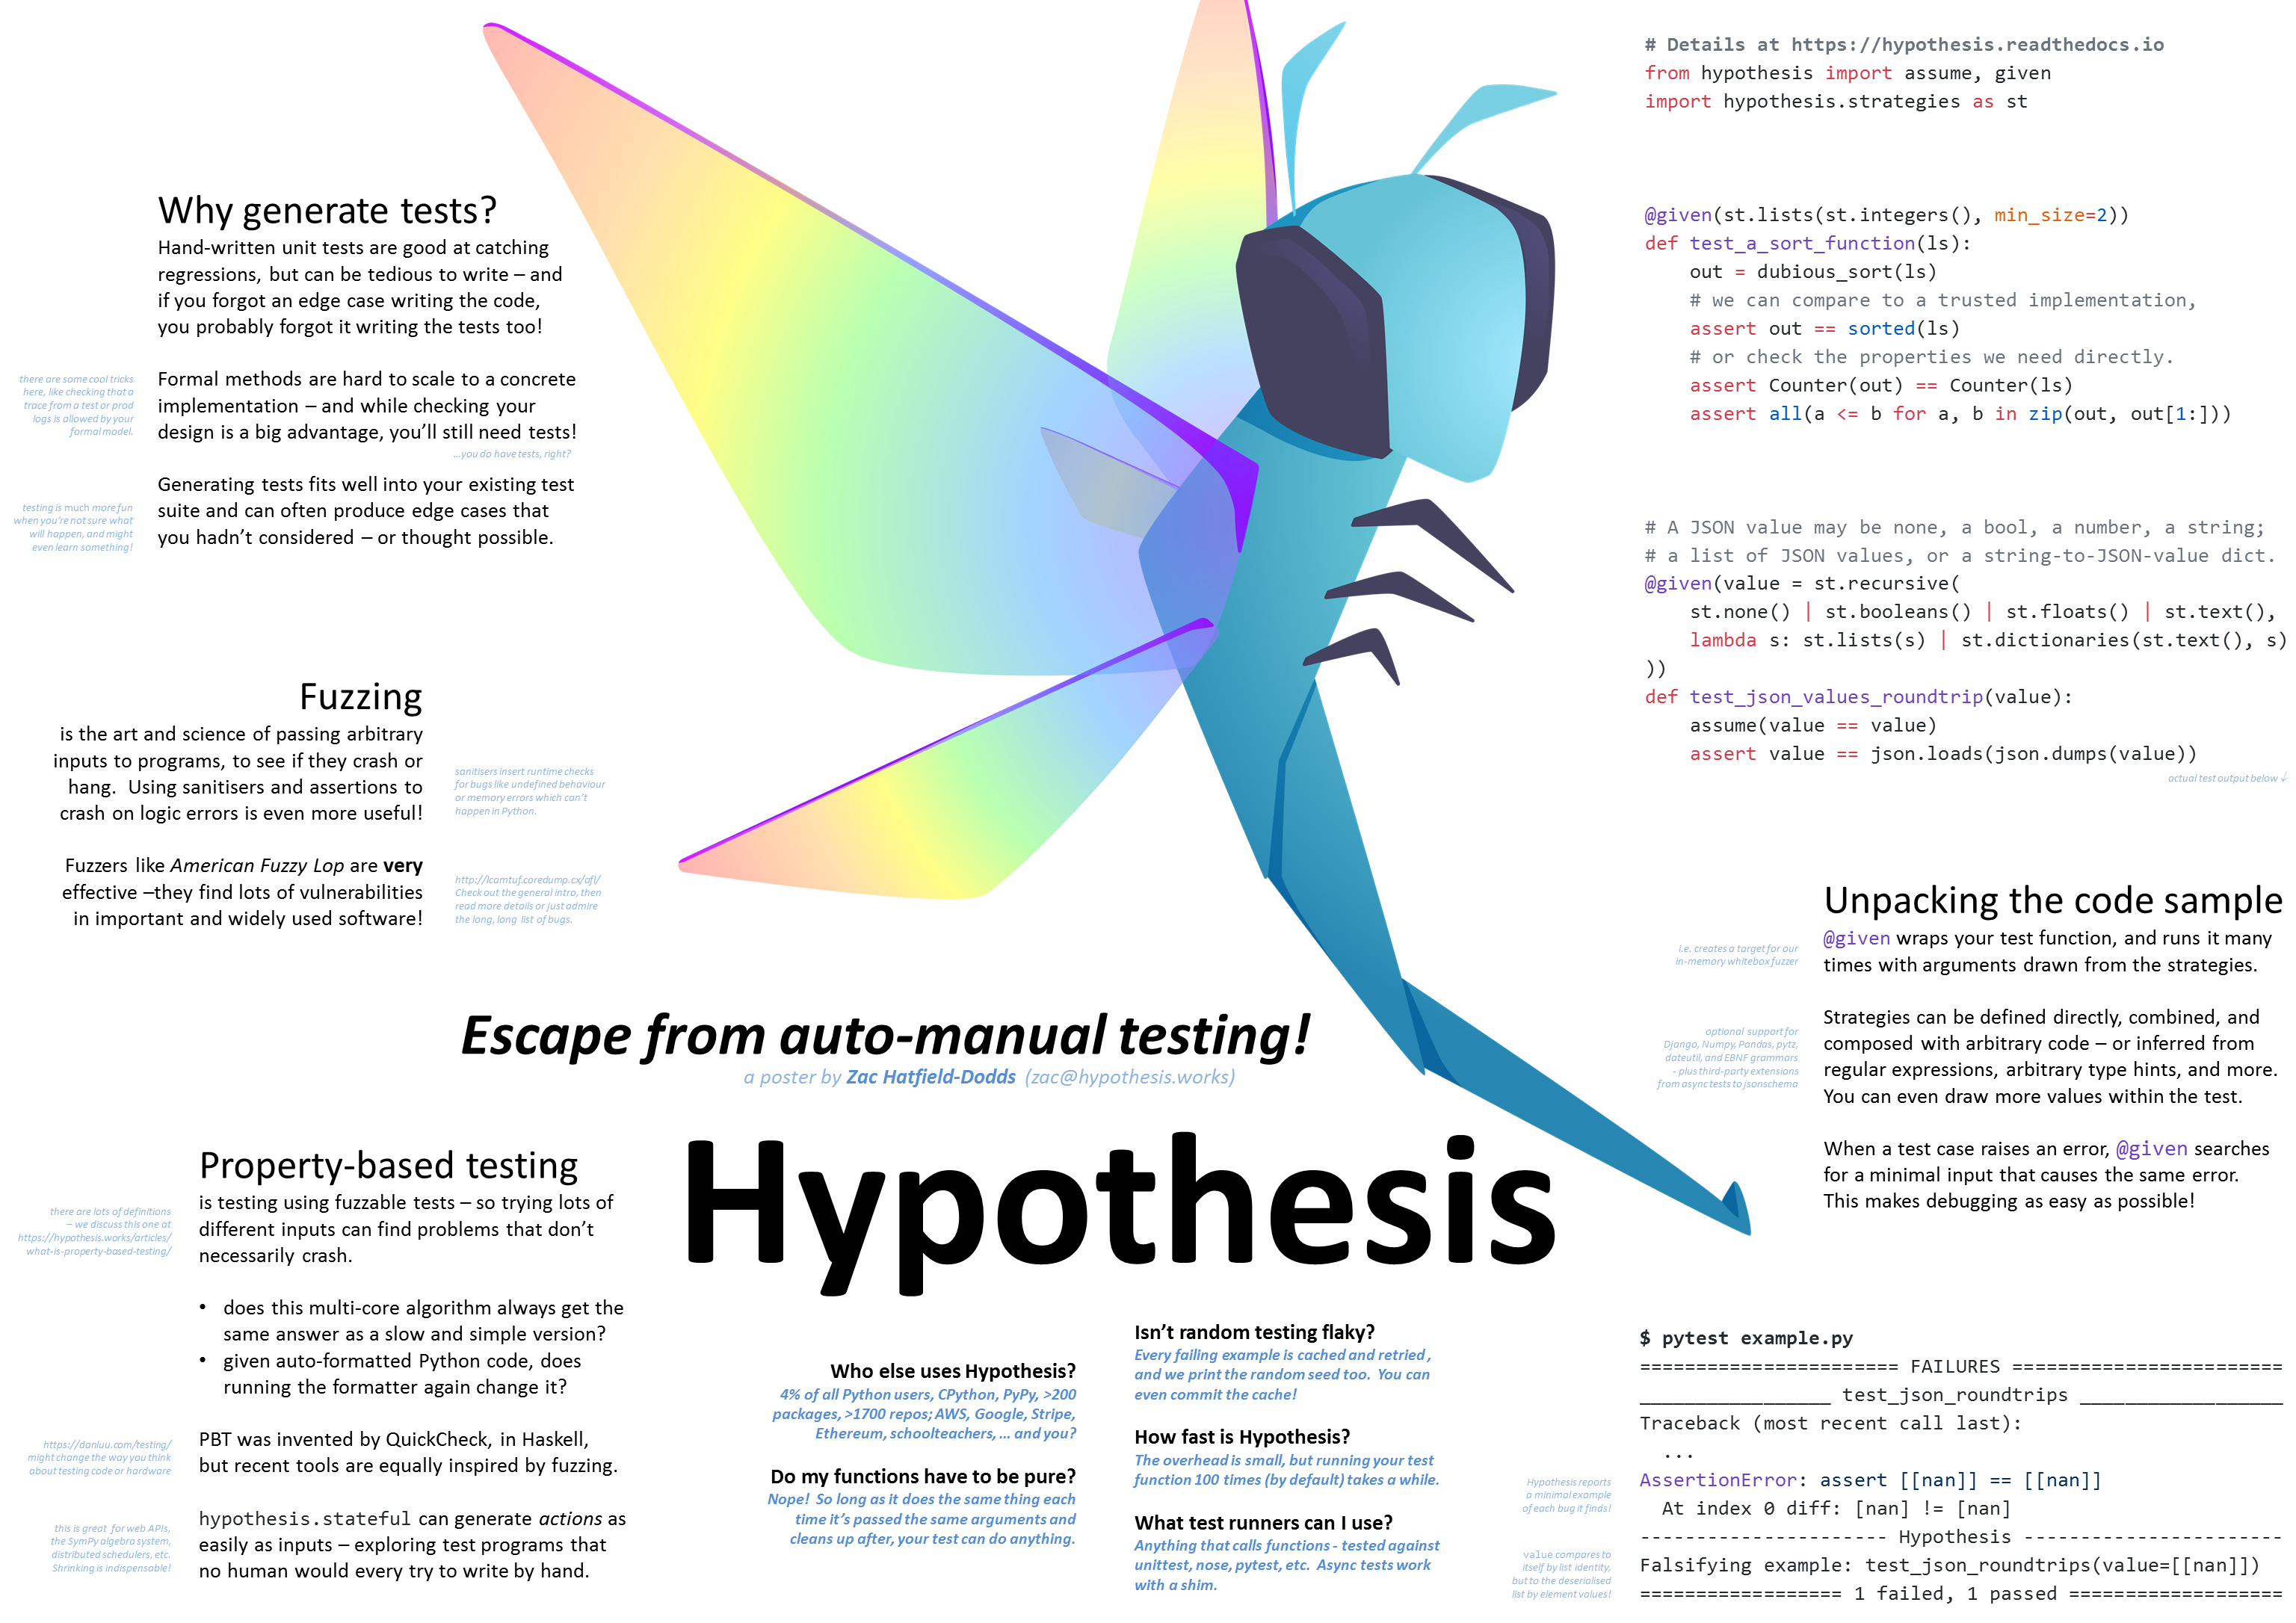 (click for PDF)  this poster introduces Hypothesis and property-based testing.